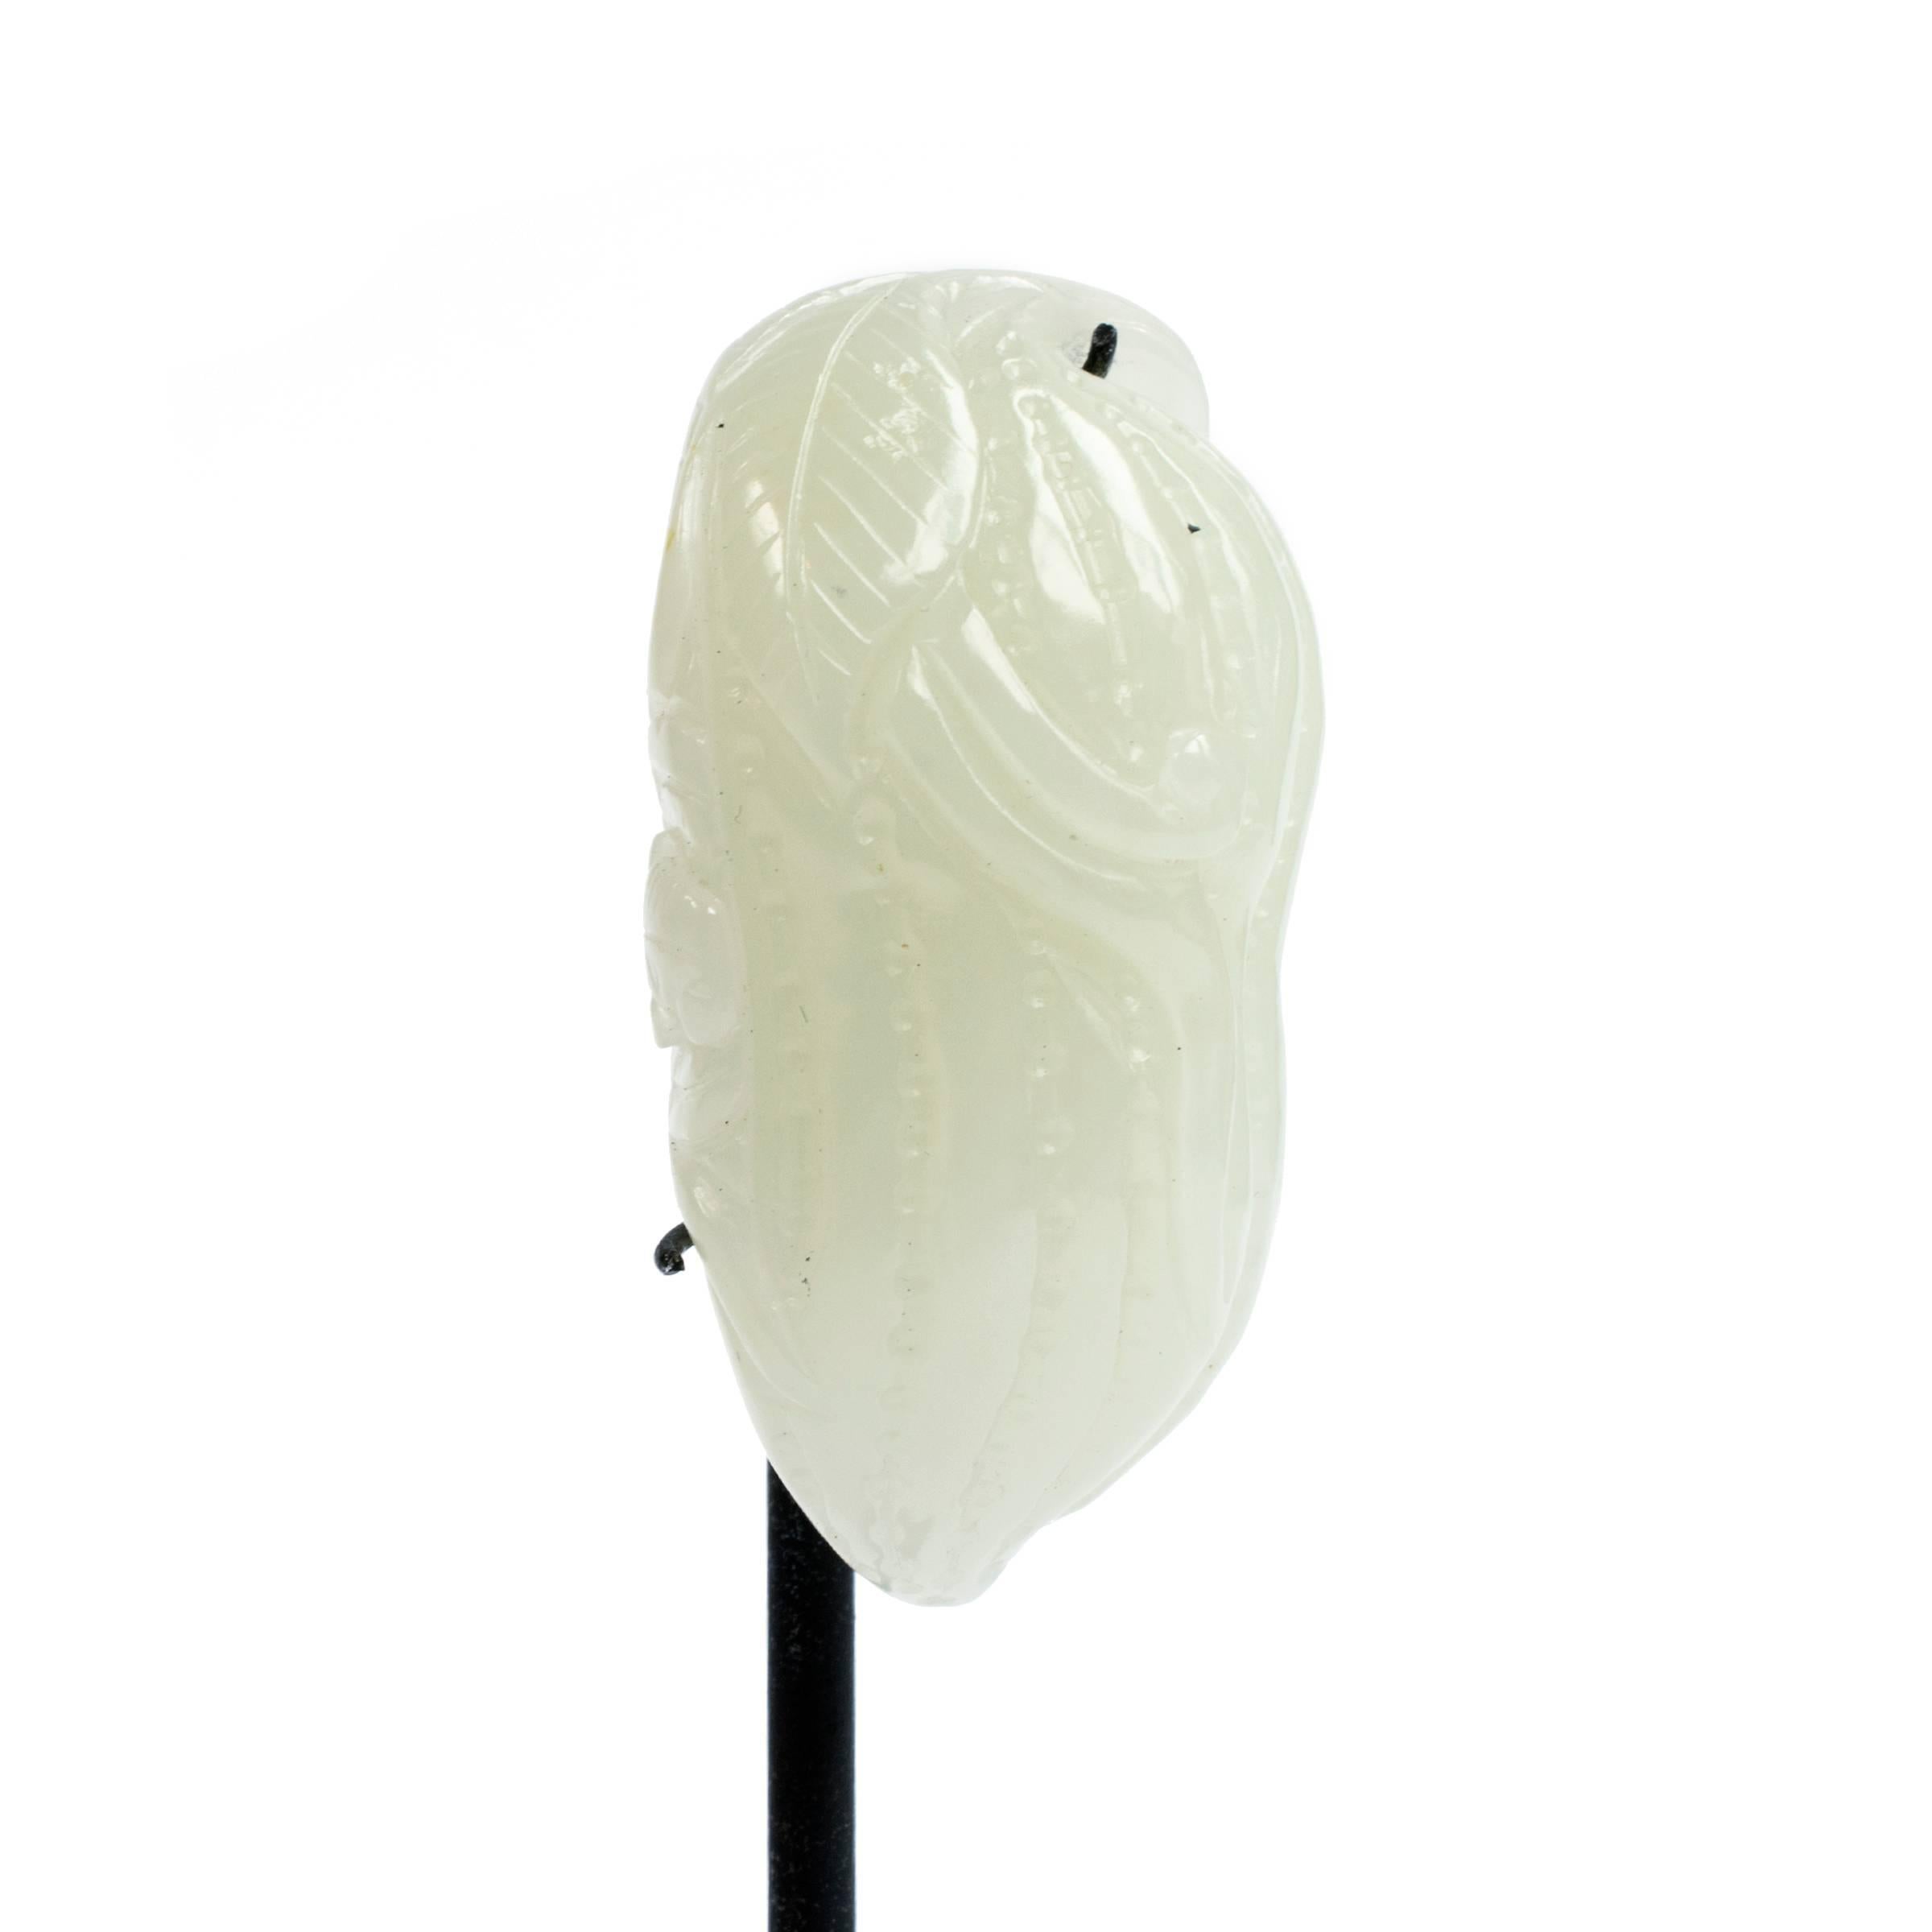 This finely crafted jade toggle is carved in the form of a melon with a leafy vine. Melons and gourds are auspicious Chinese symbols of virility because they contain many seeds. Like other finely carved toggles, such a charm would have been prized